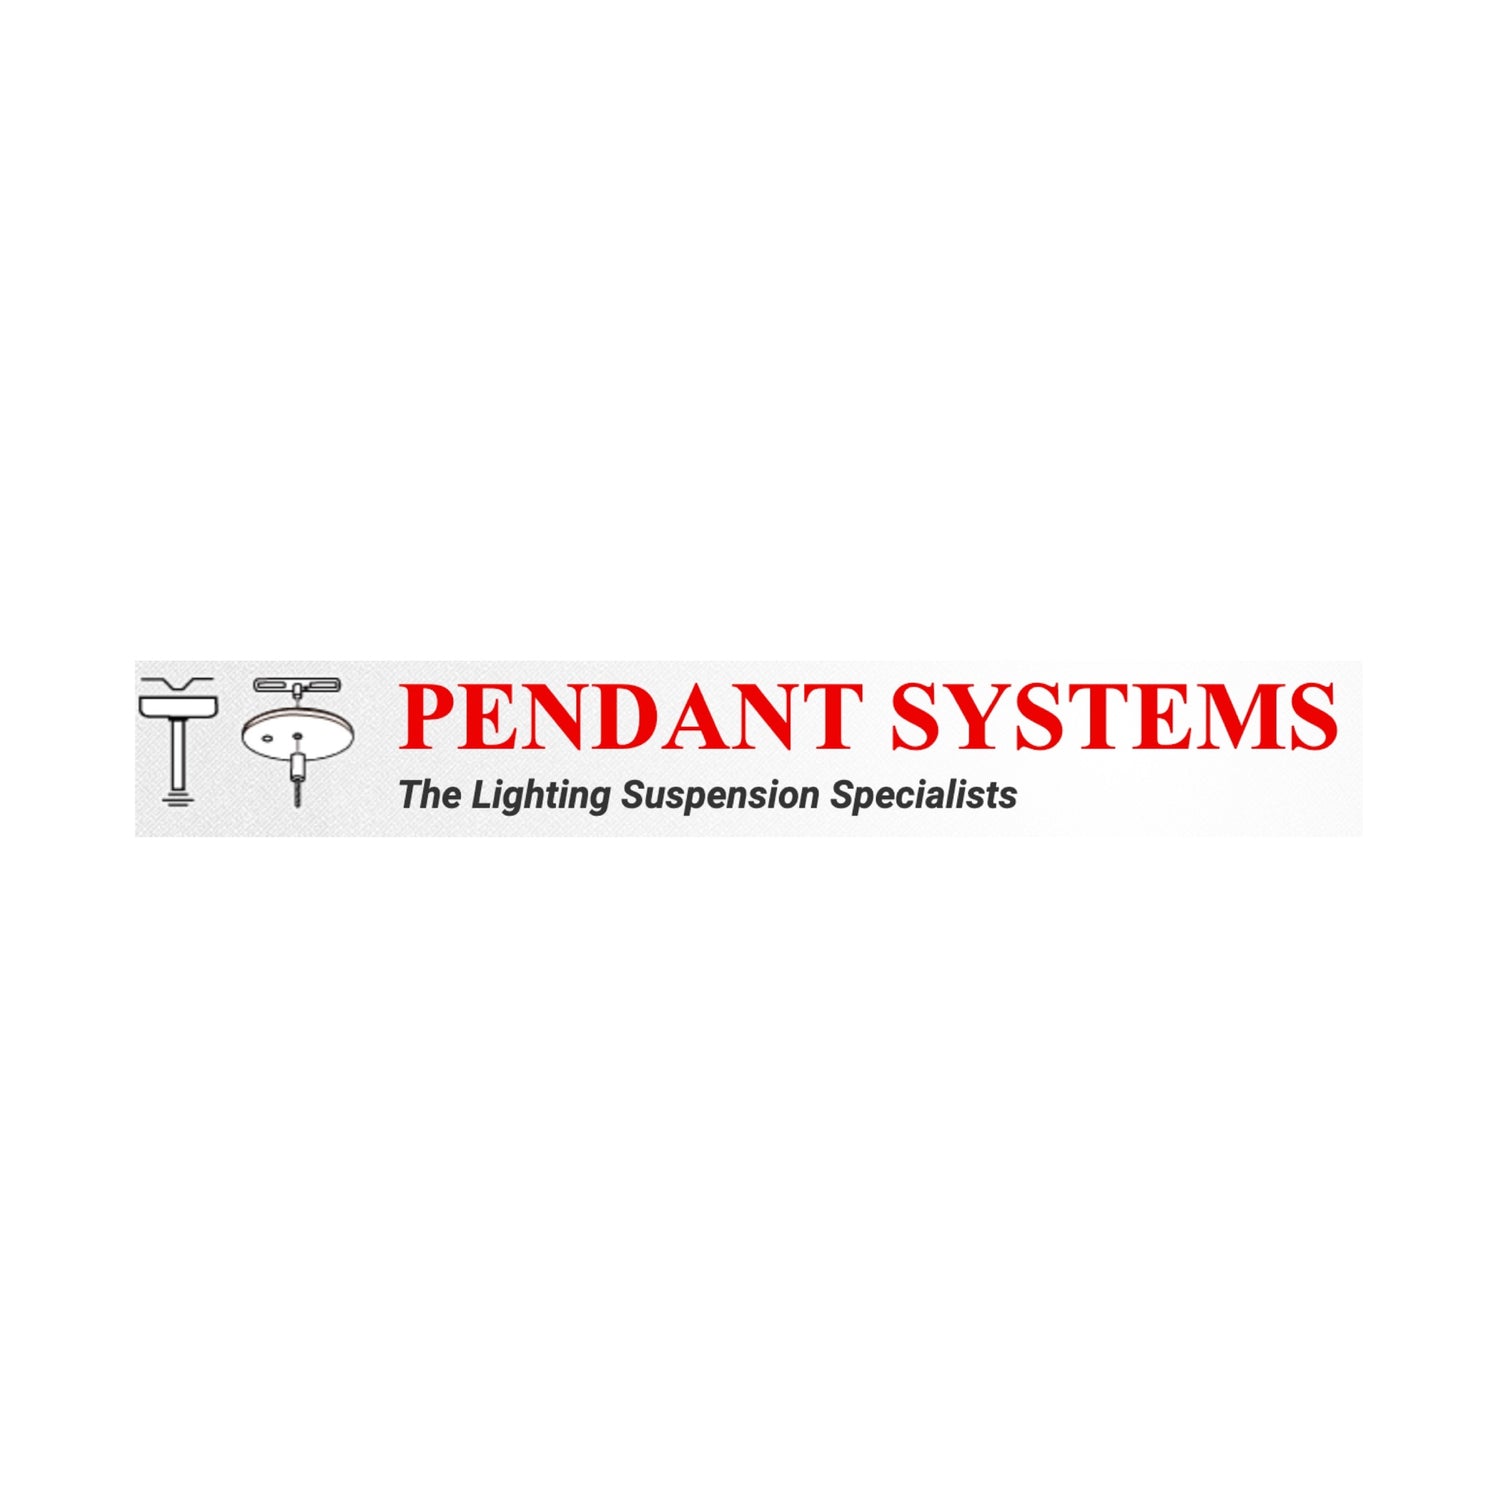 PENDANT SYSTEMS